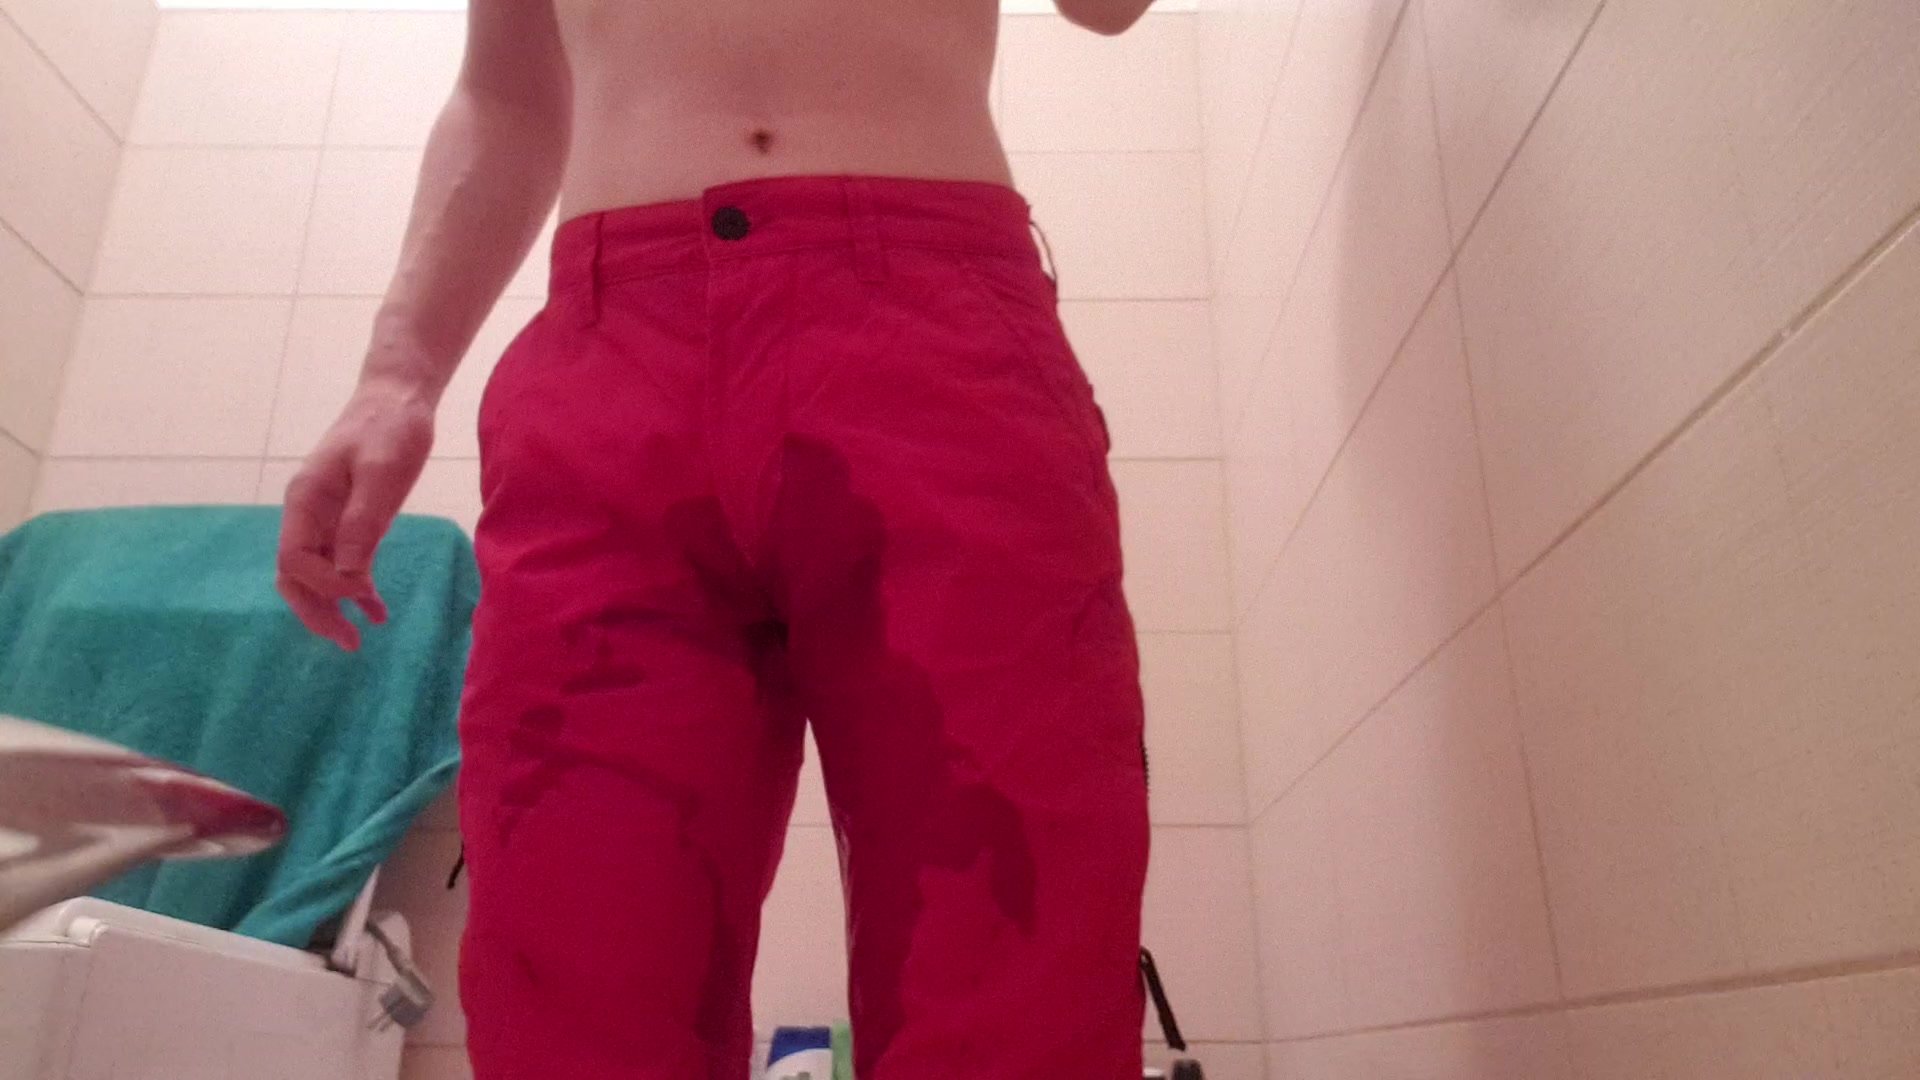 Wetting red pants and marvel undies